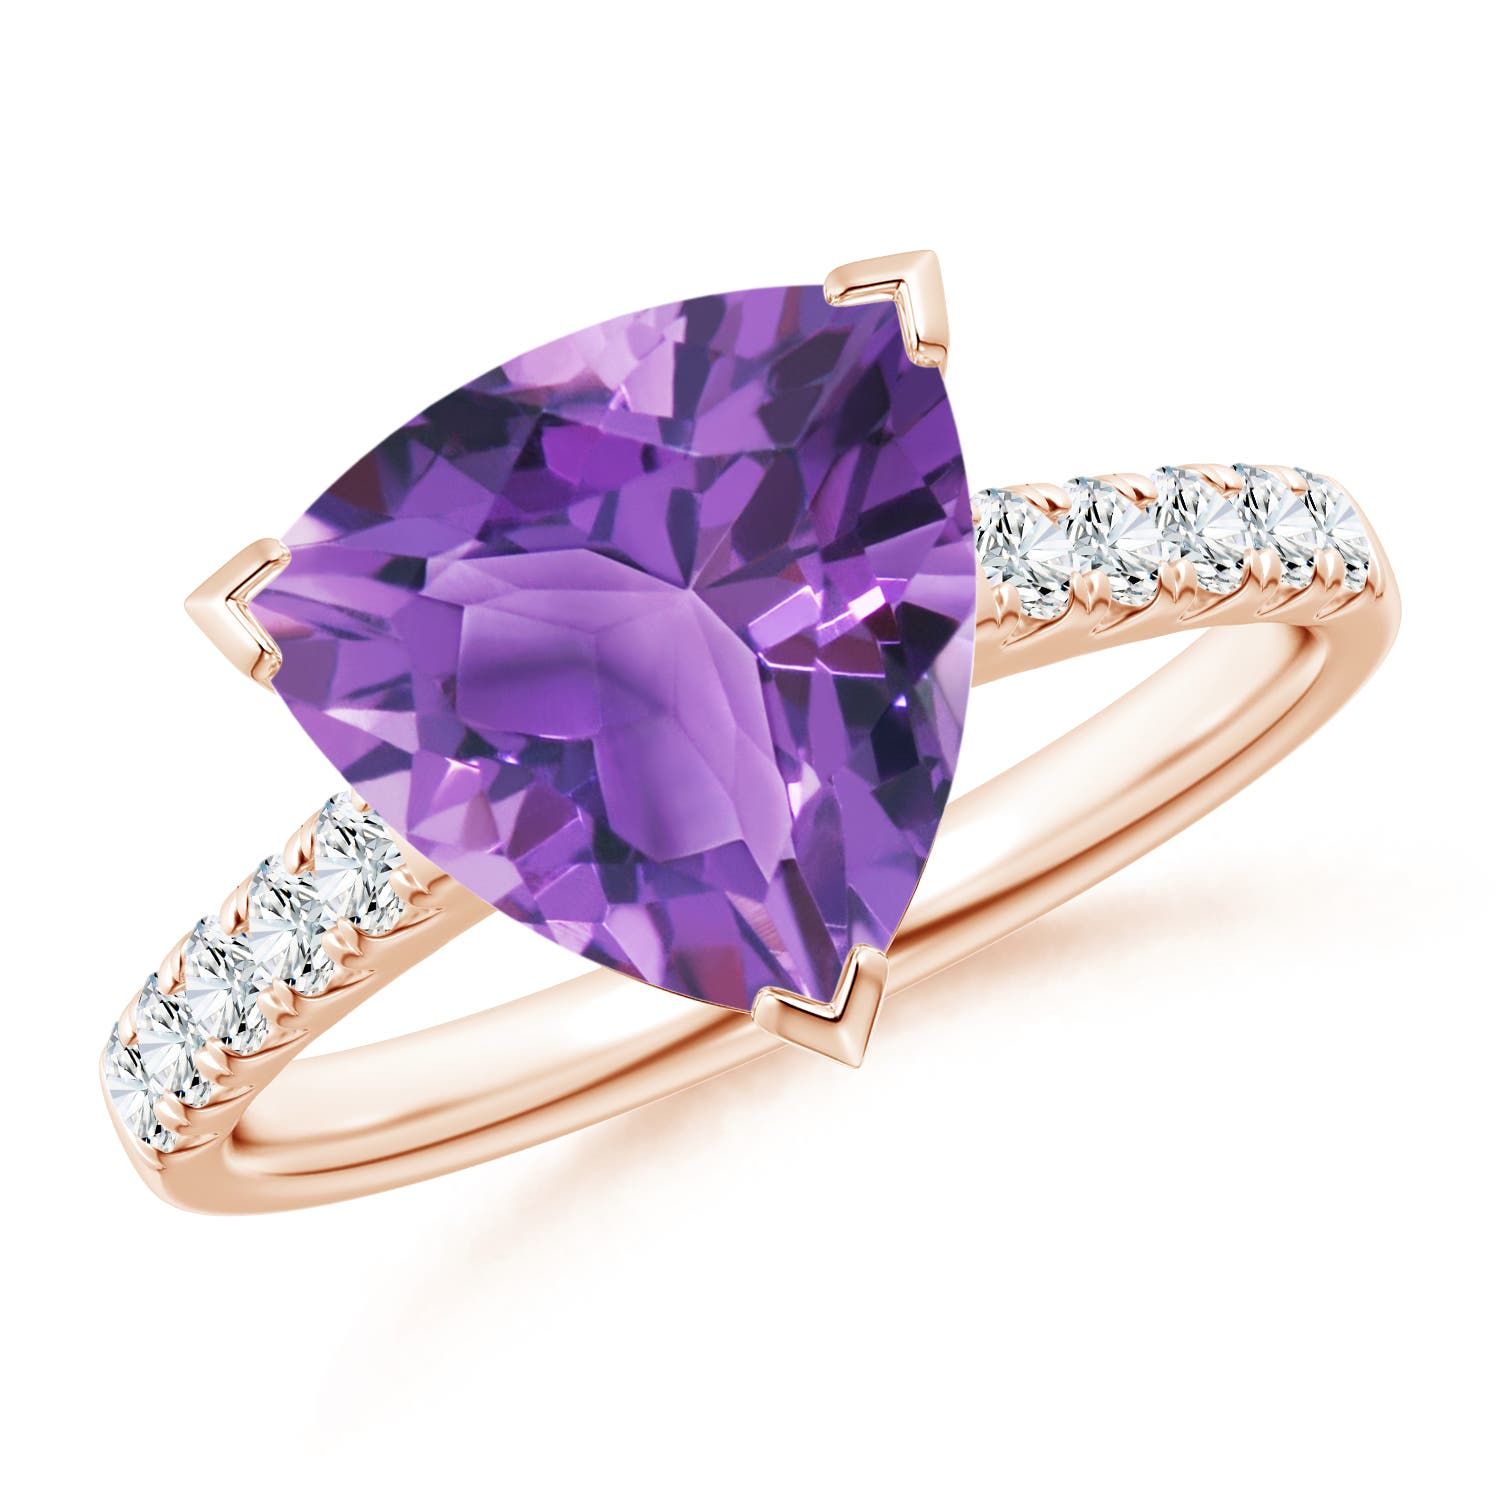 AA - Amethyst / 2.95 CT / 14 KT Rose Gold